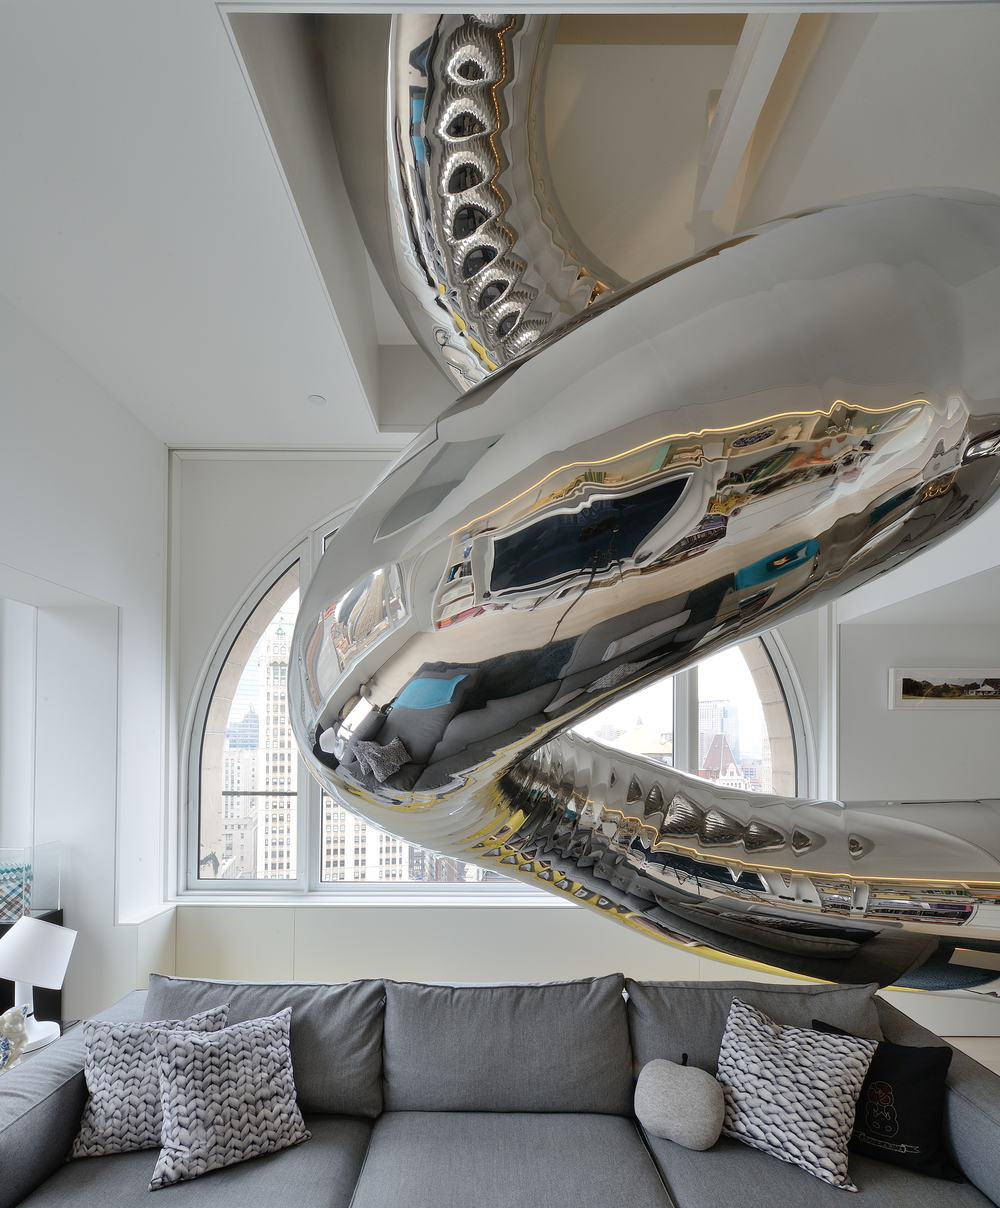 Private Playgrounds: 5 of the Coolest Slides Inside Homes